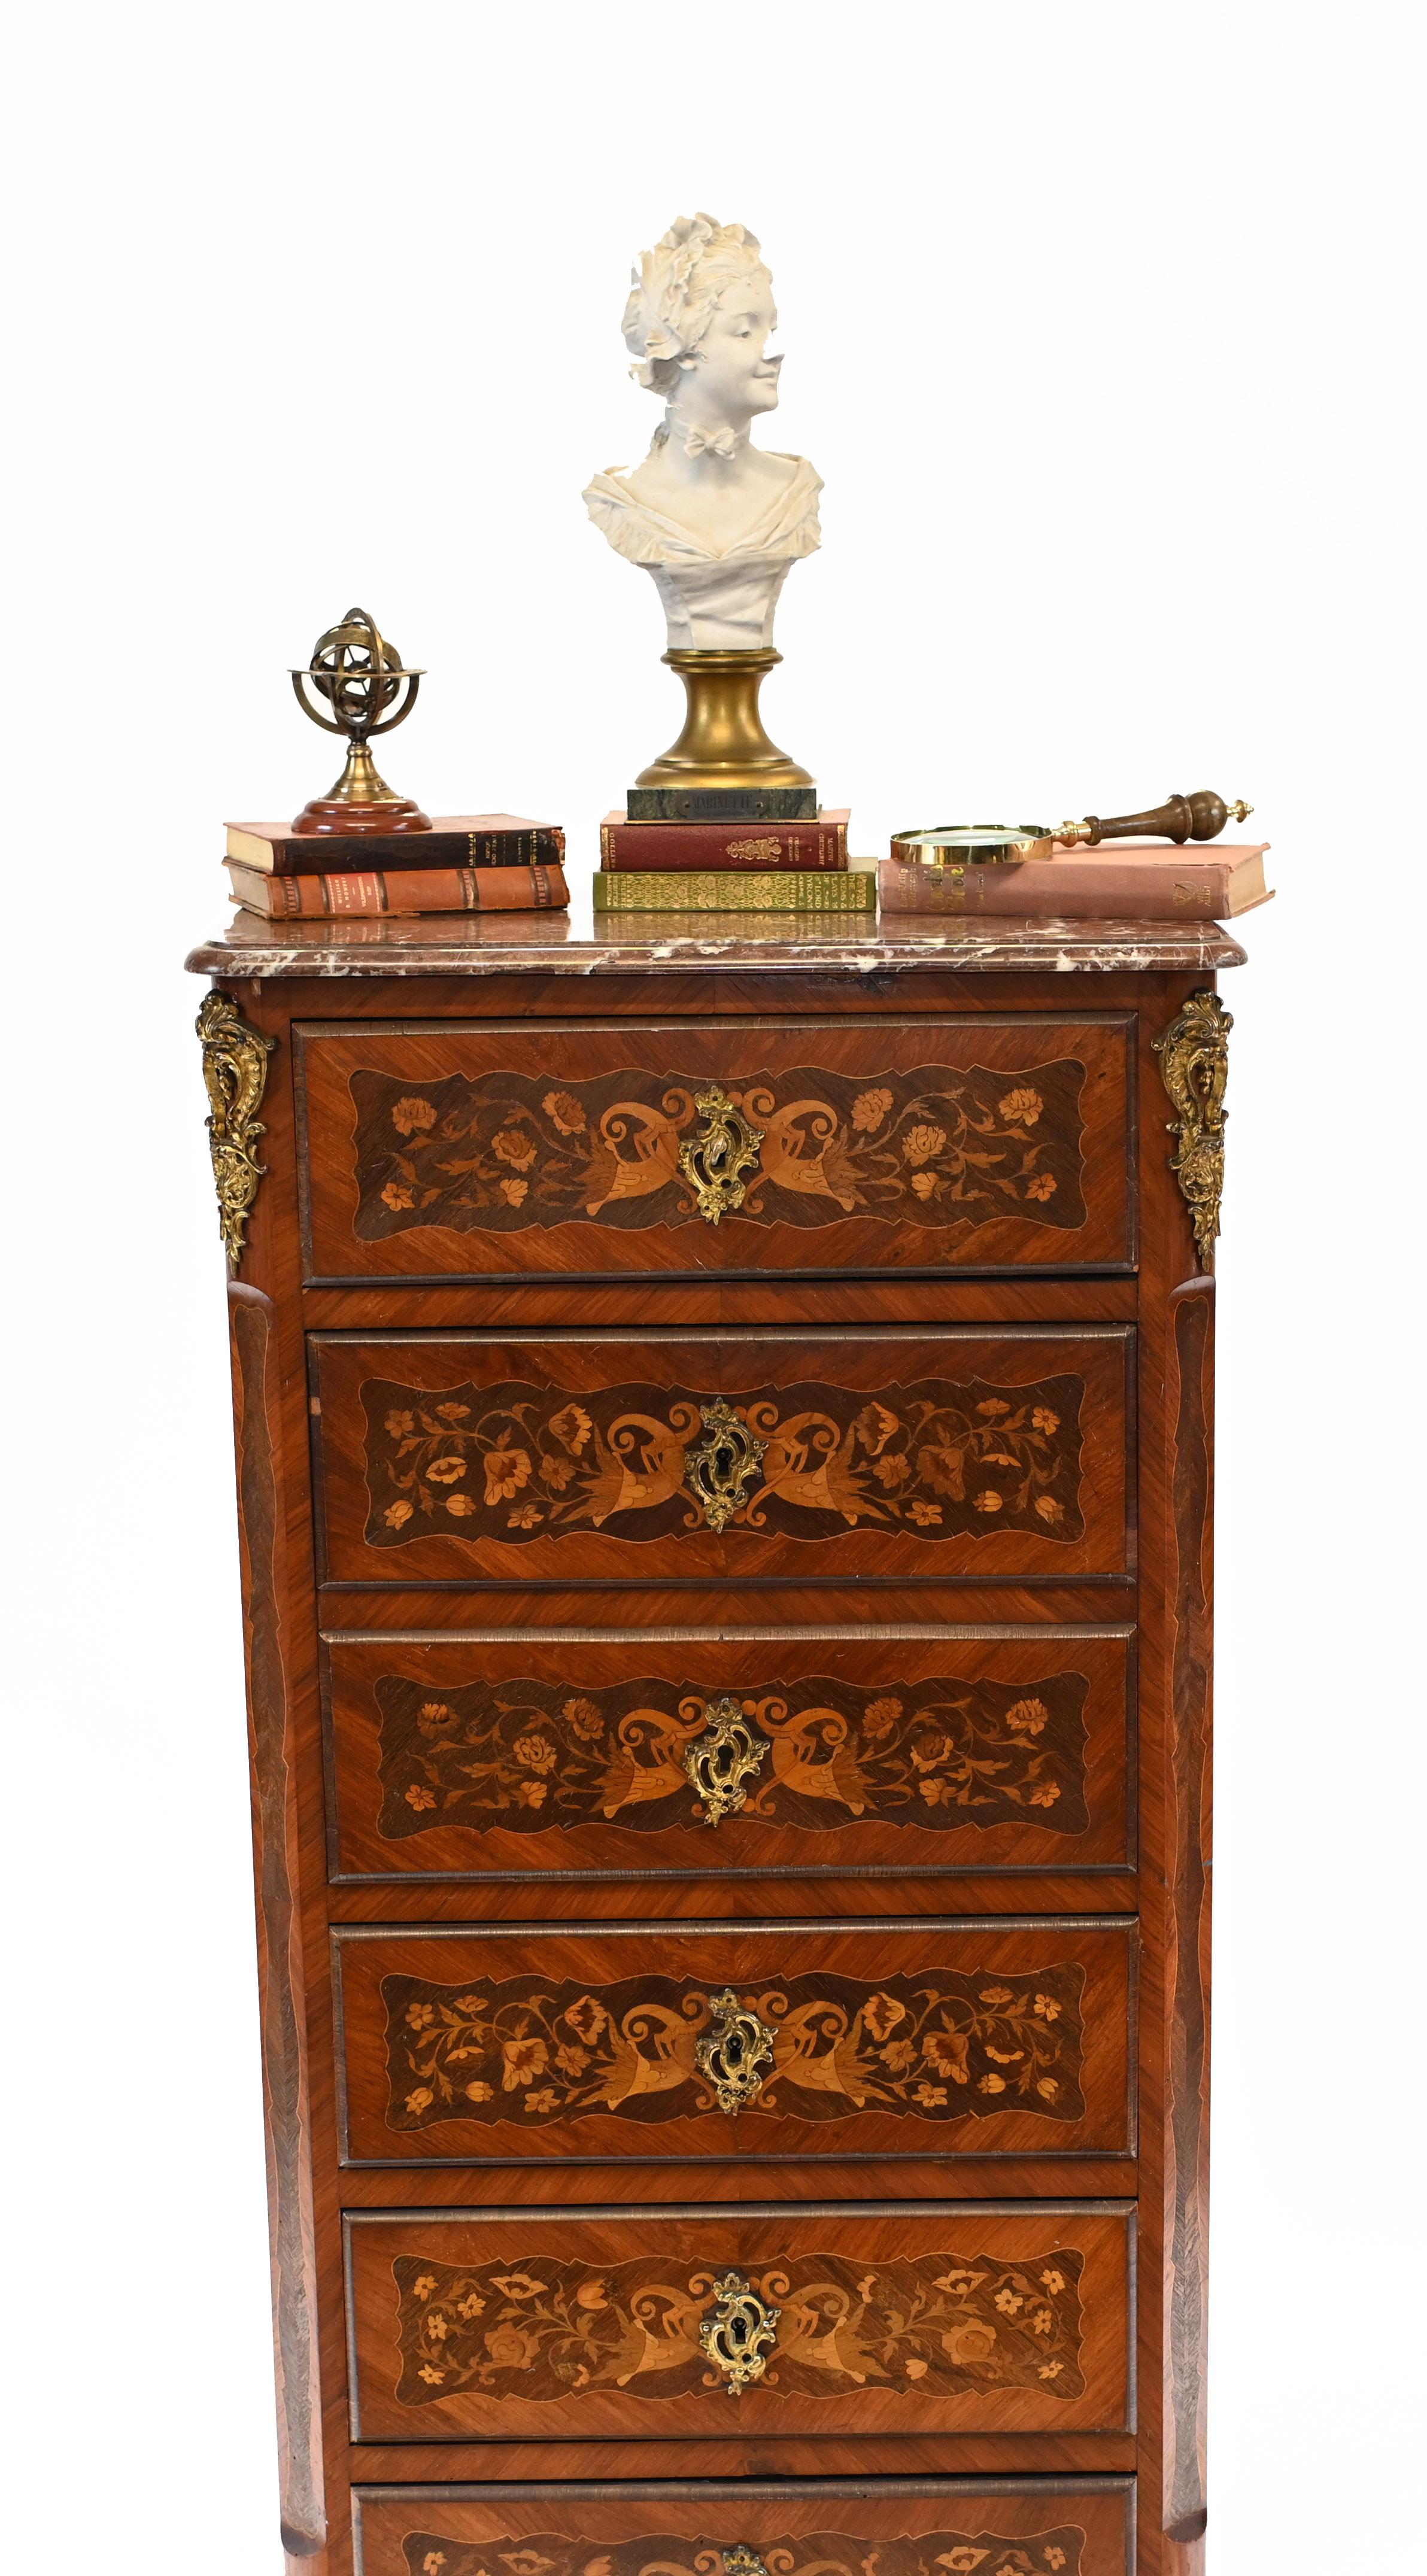 Gorgeous antique French chest - or tall boy - with six drawers
Features a marble top and a proffusion of intricate floral inlay
Circa 1880
Bought from a dealer at Les Puces antiques market in Paris 
Original ormolu fixtures on this handsome